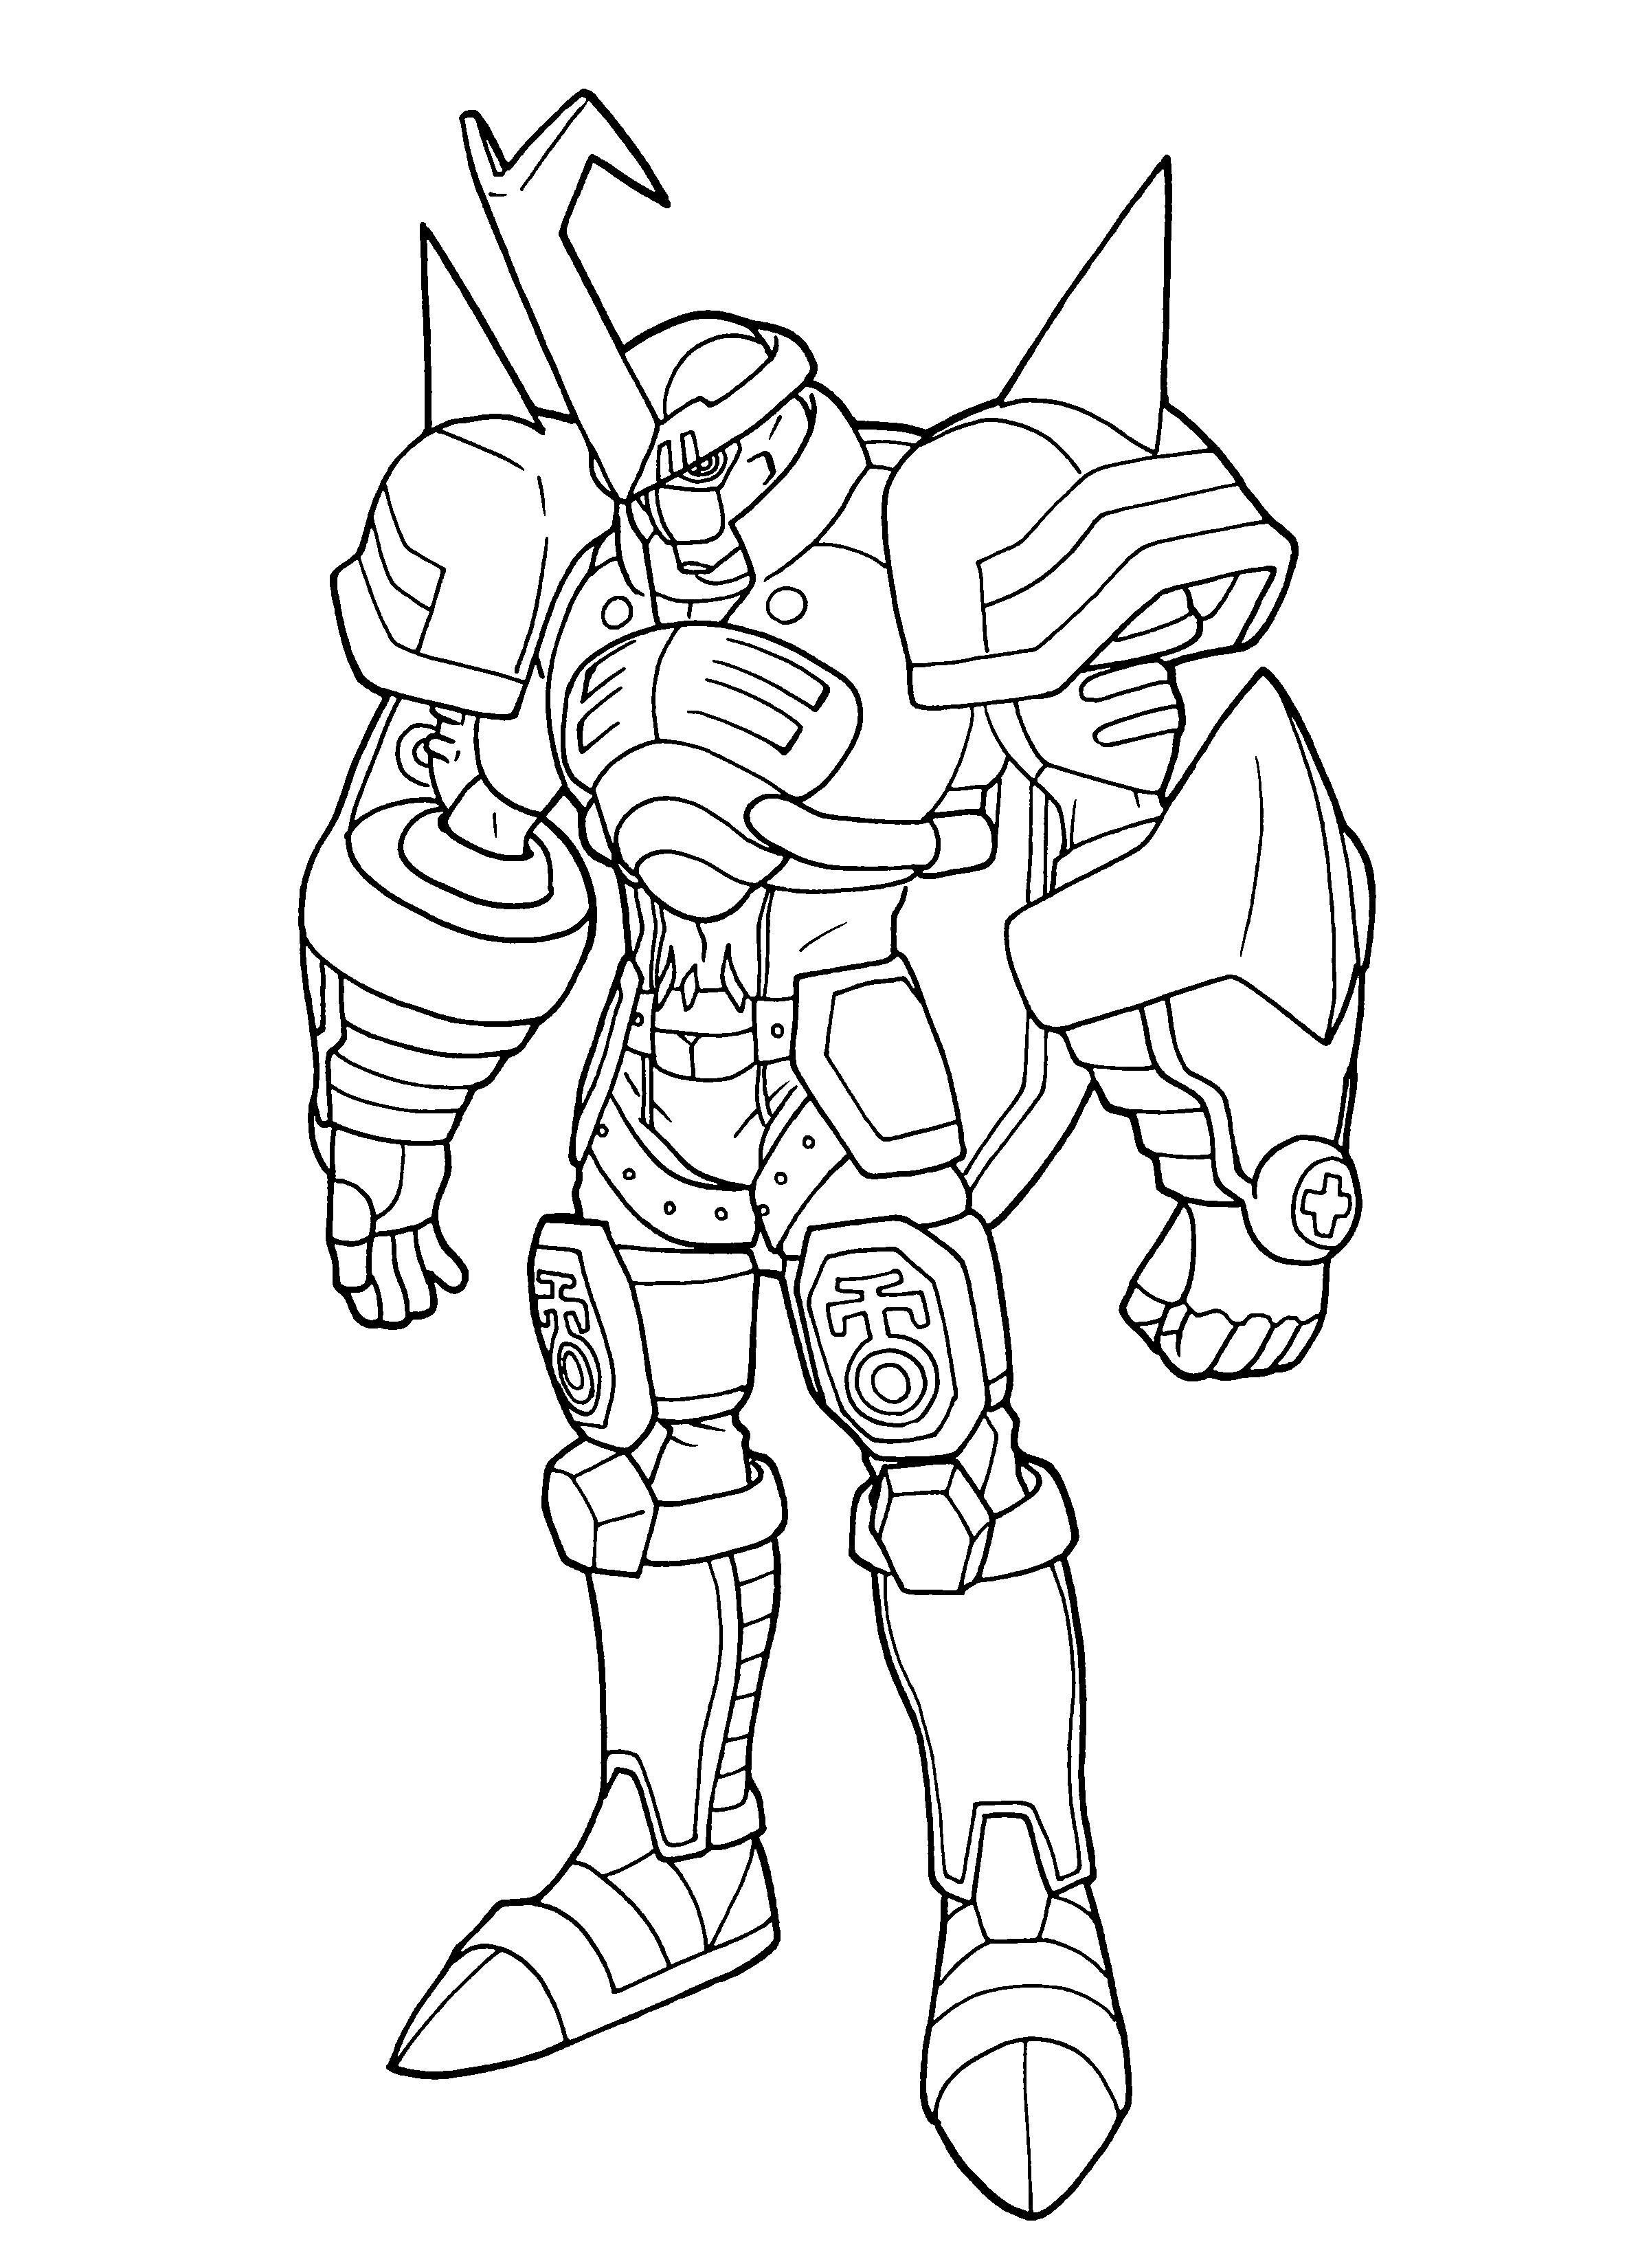 Coloring Page - Digimon coloring pages 80